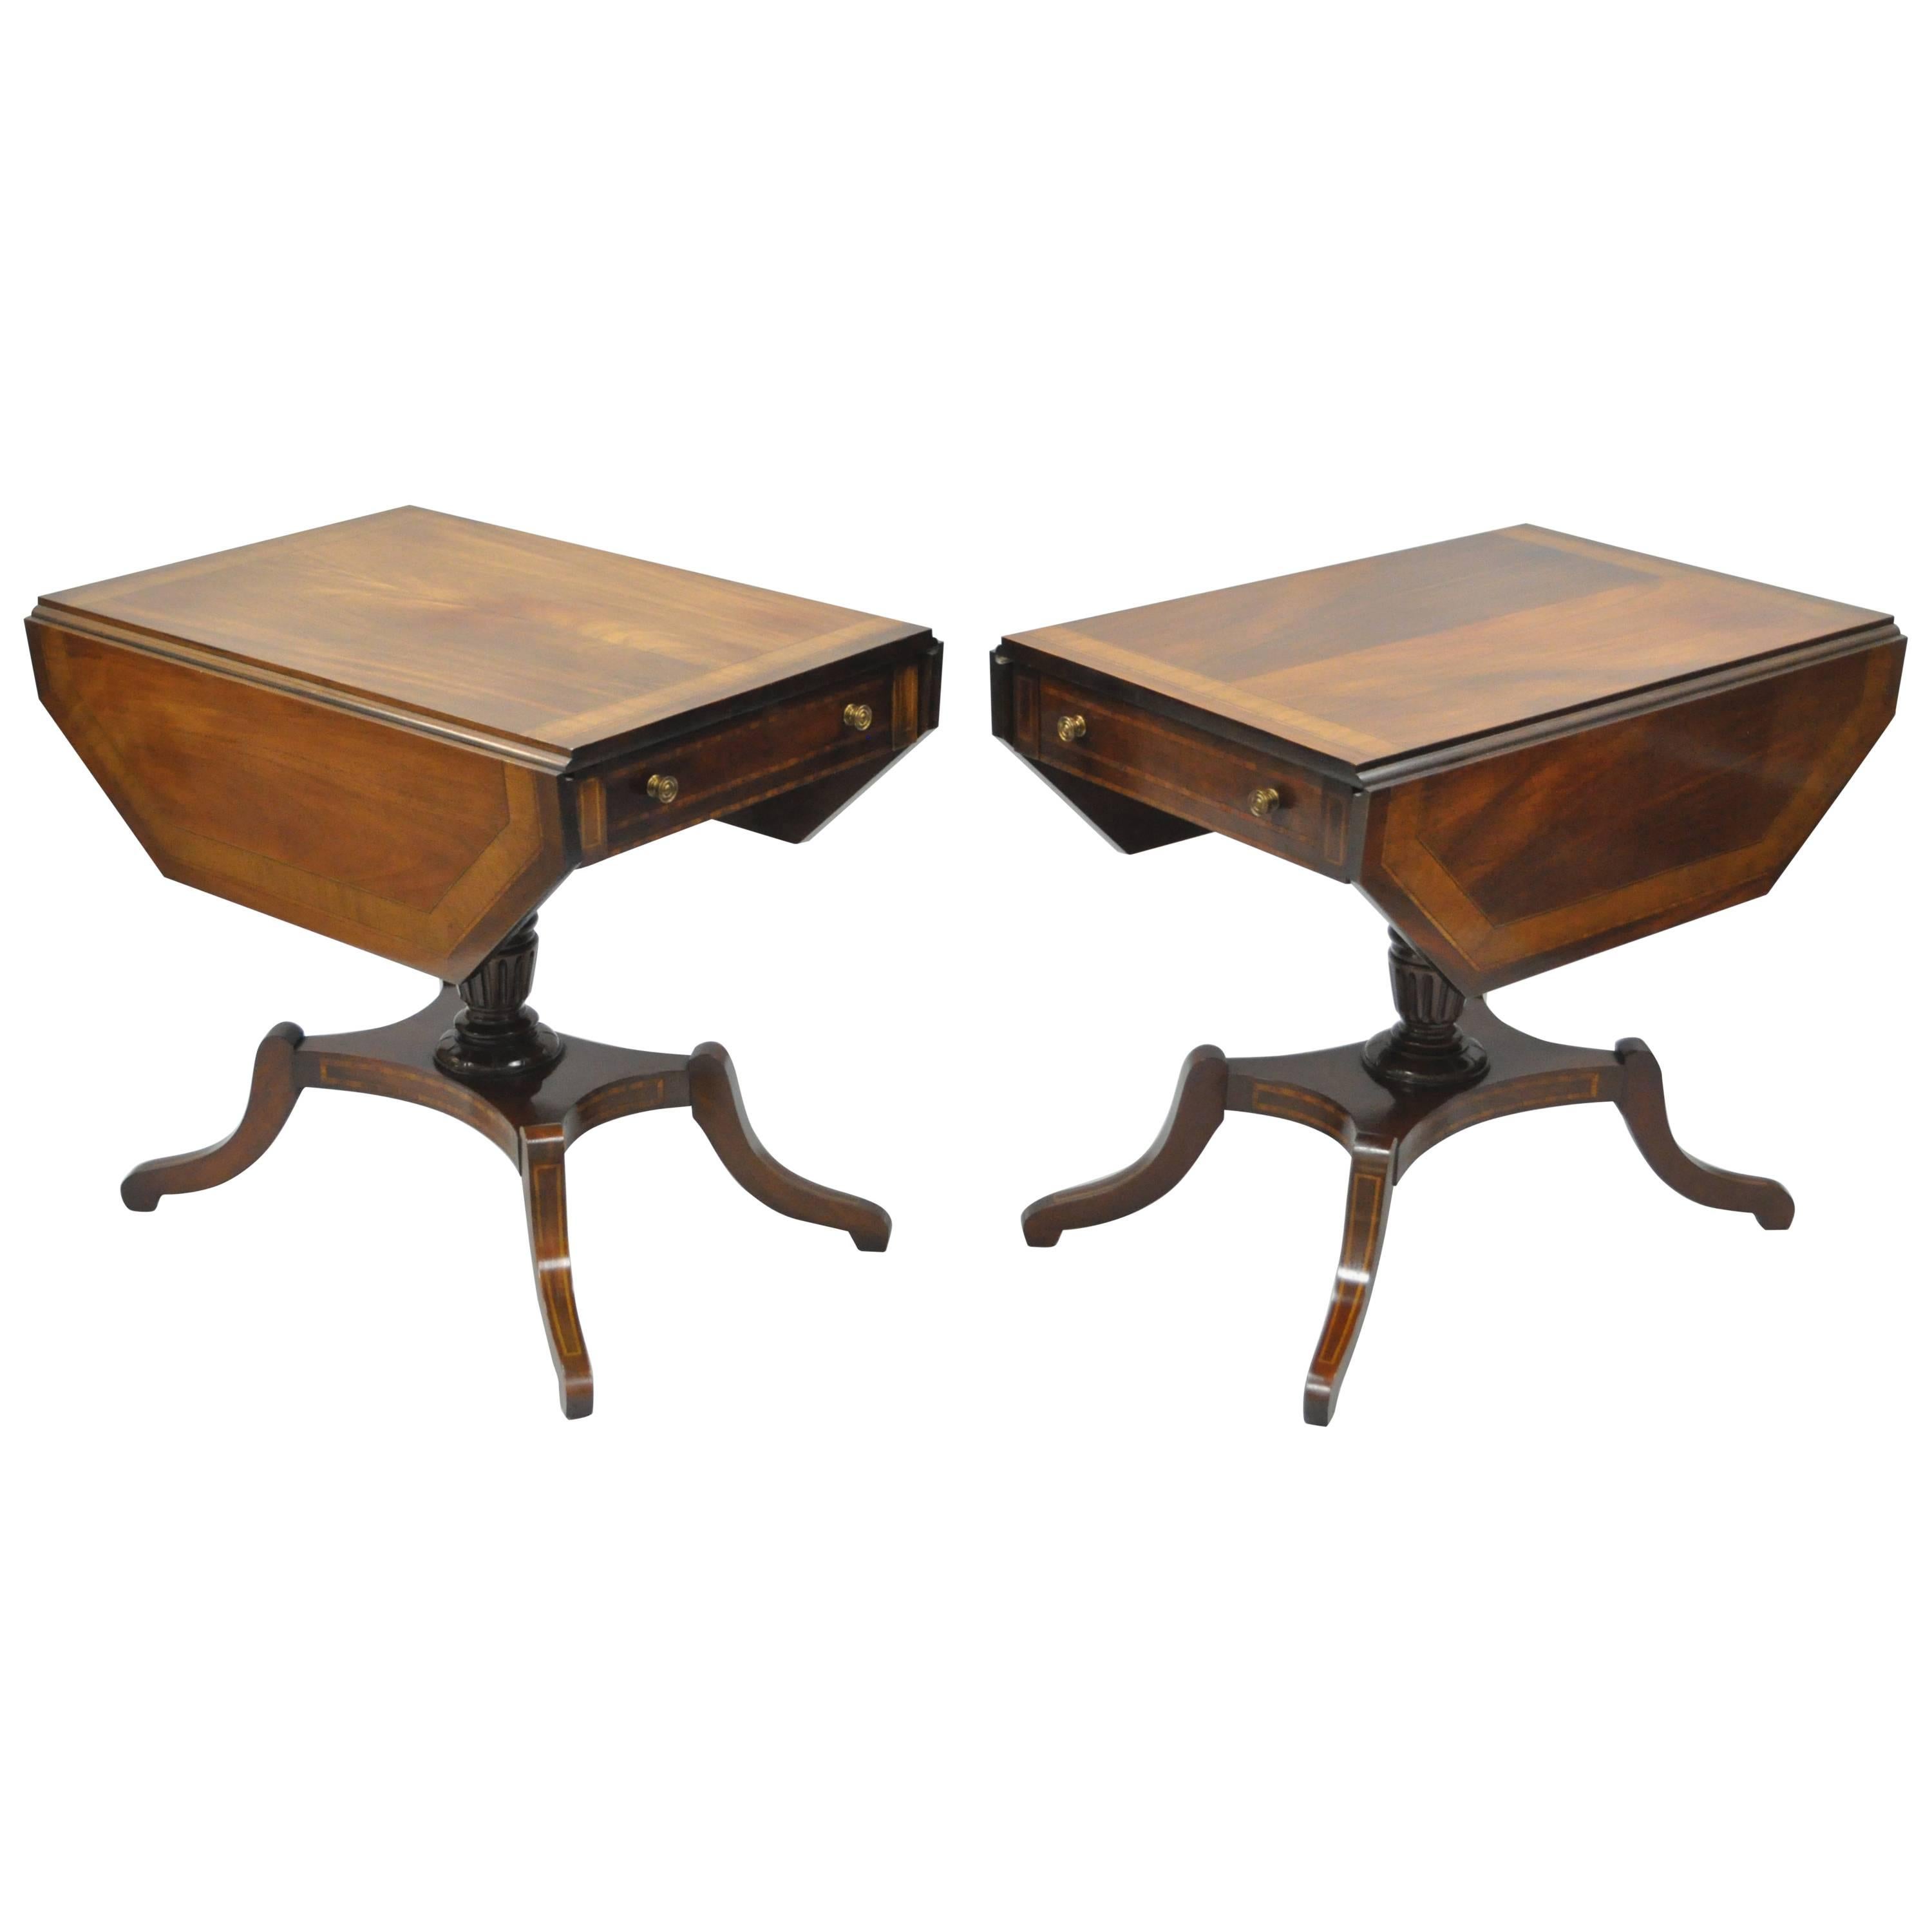 Pair of Regency Style Mahogany Banded Inlaid Drop Leaf Pembroke End Tables